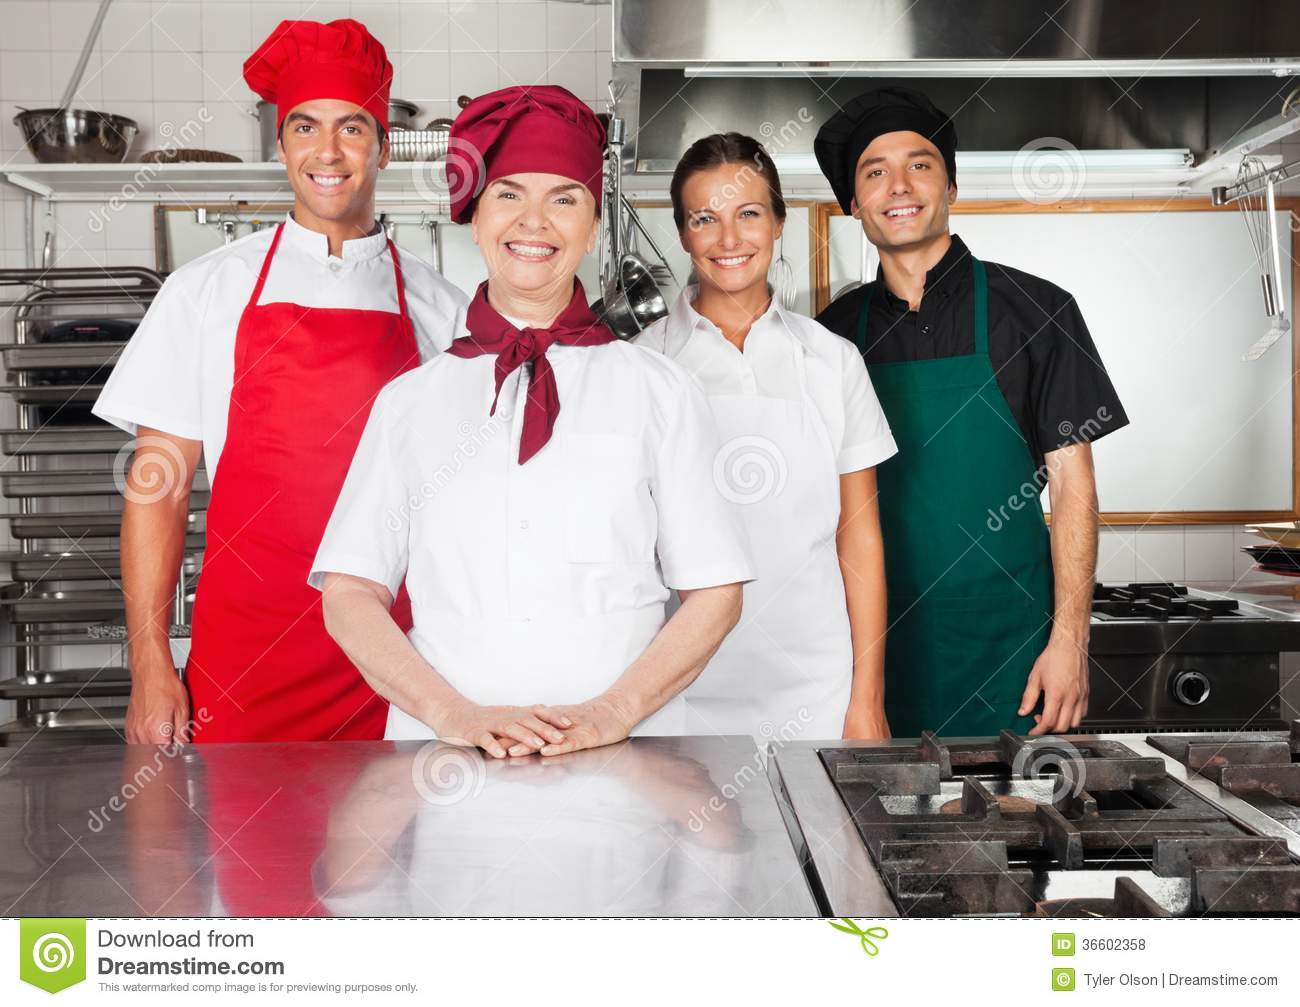 Happy Chefs Standing Together In Kitchen Royalty Free Stock Photos    